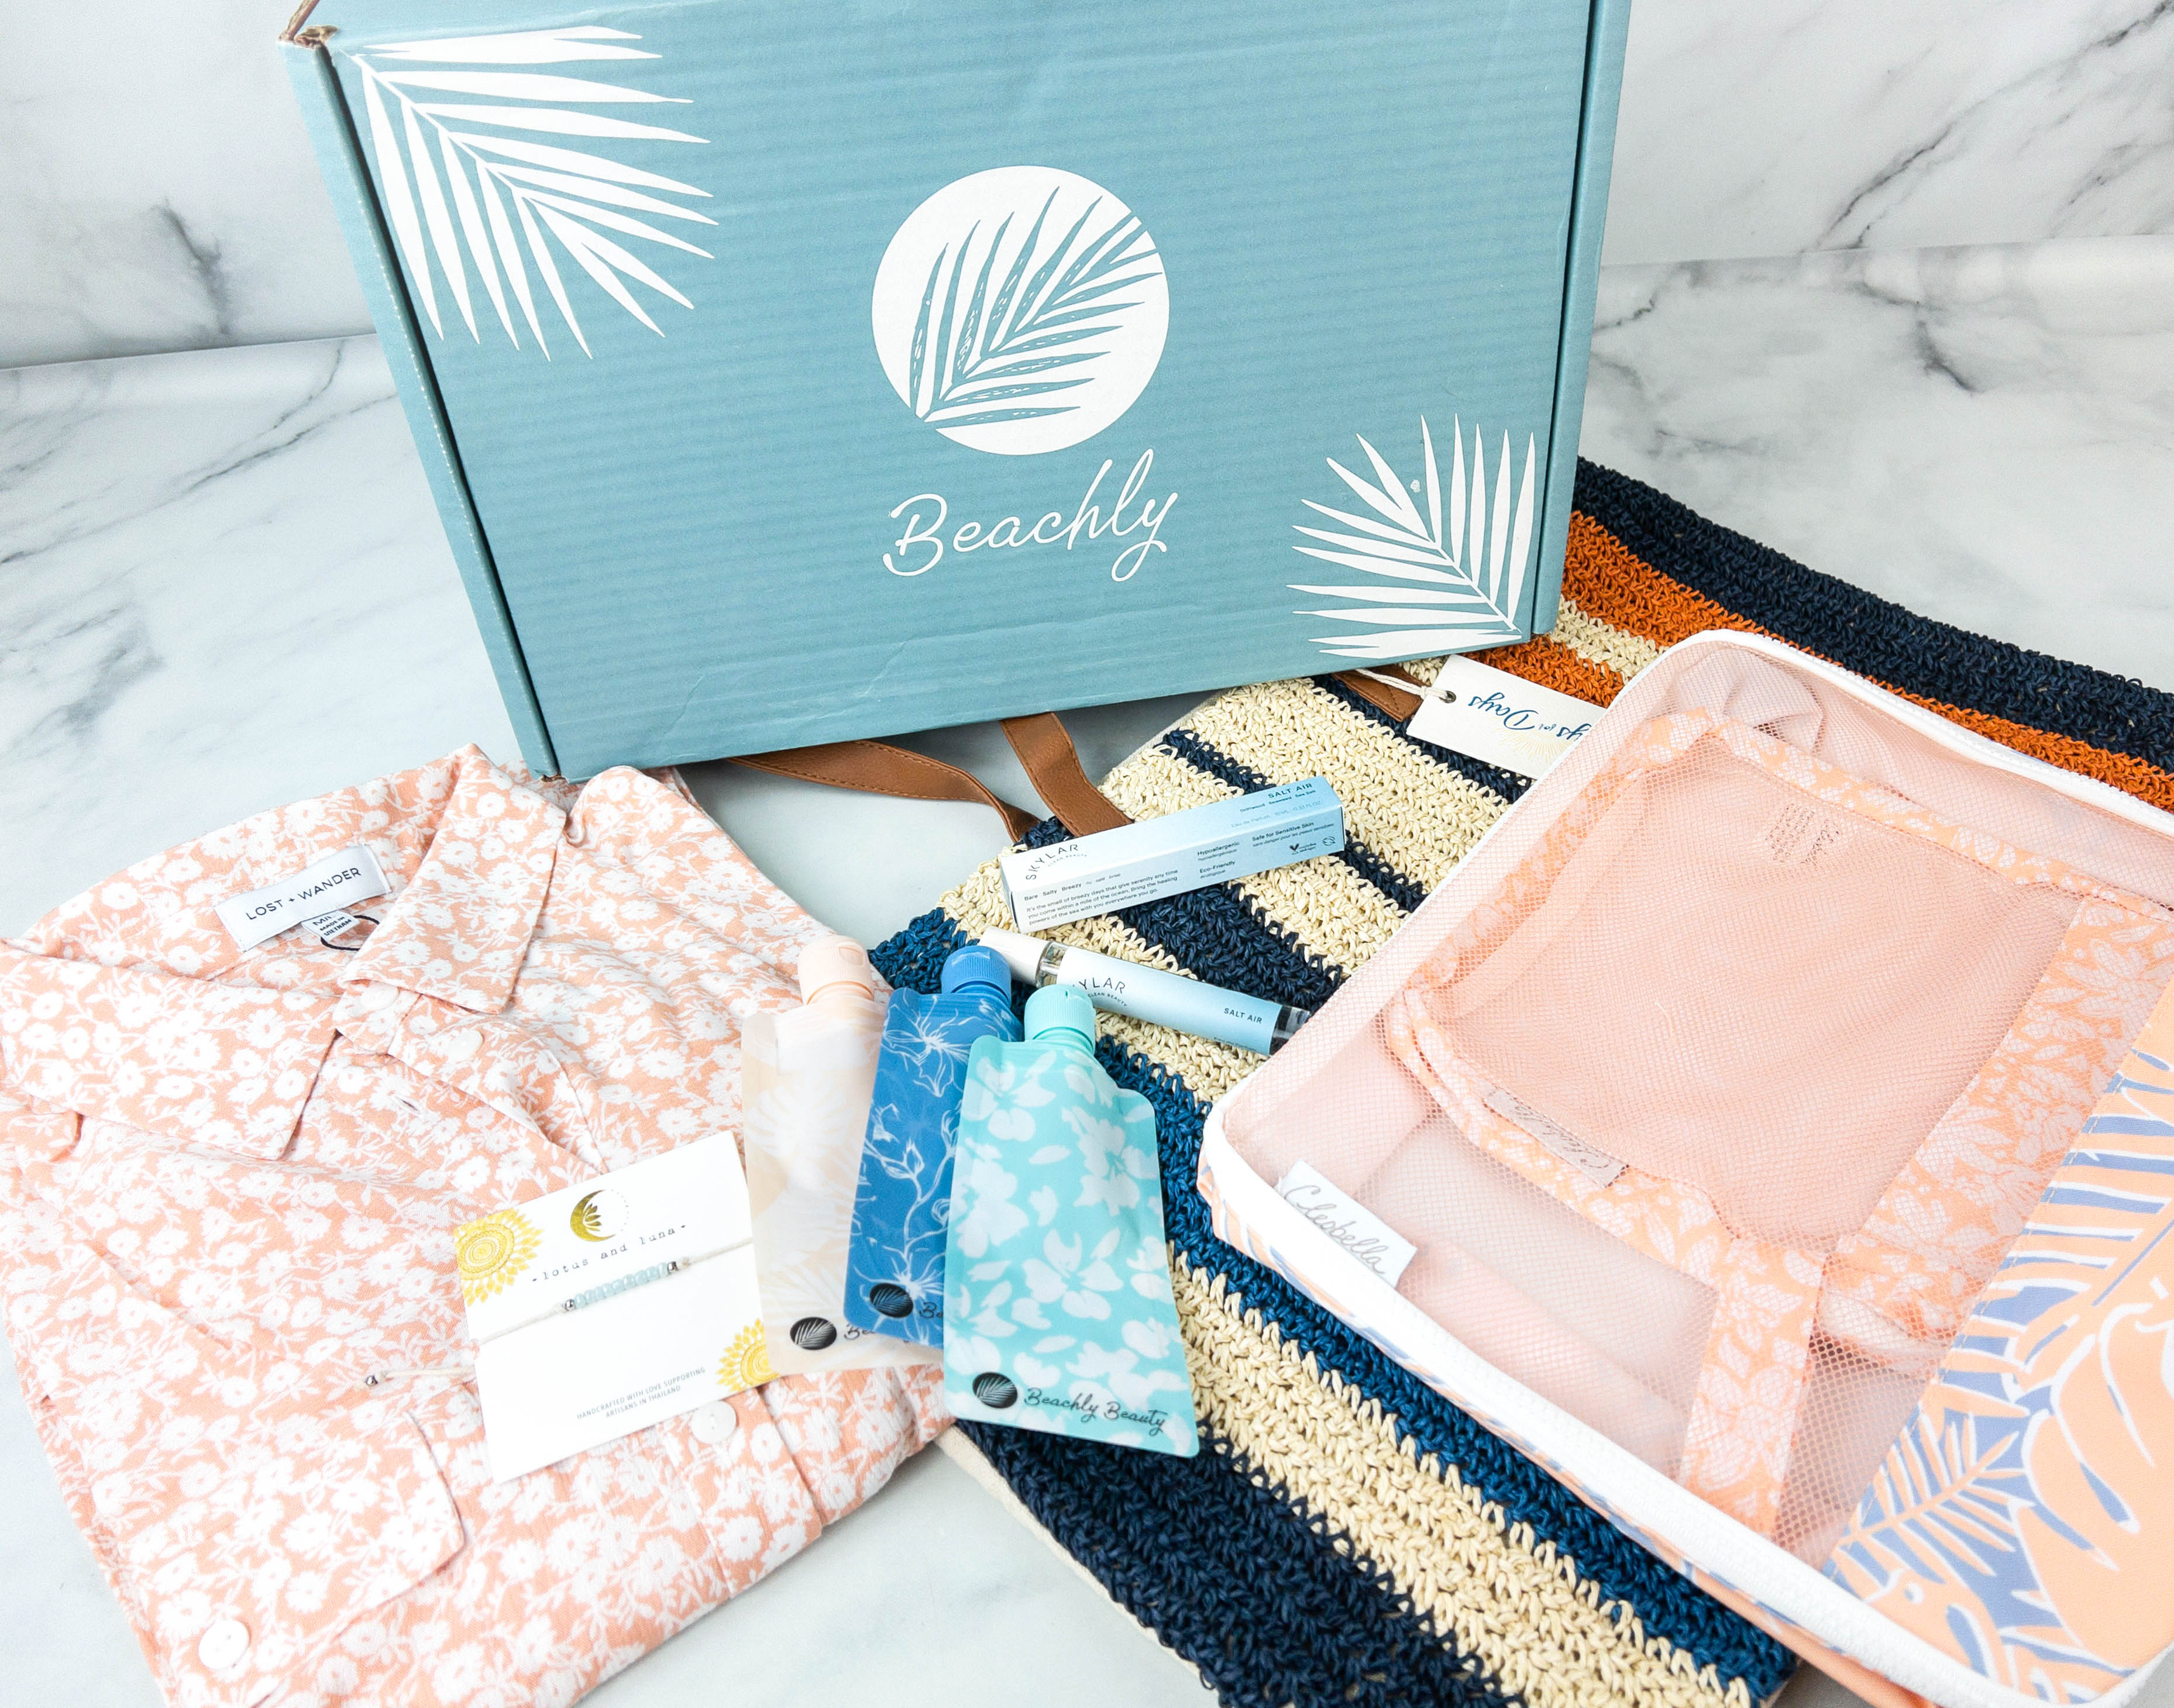 Beachly Women's Box A BeachThemed Box Overflowing With Spring Vibes